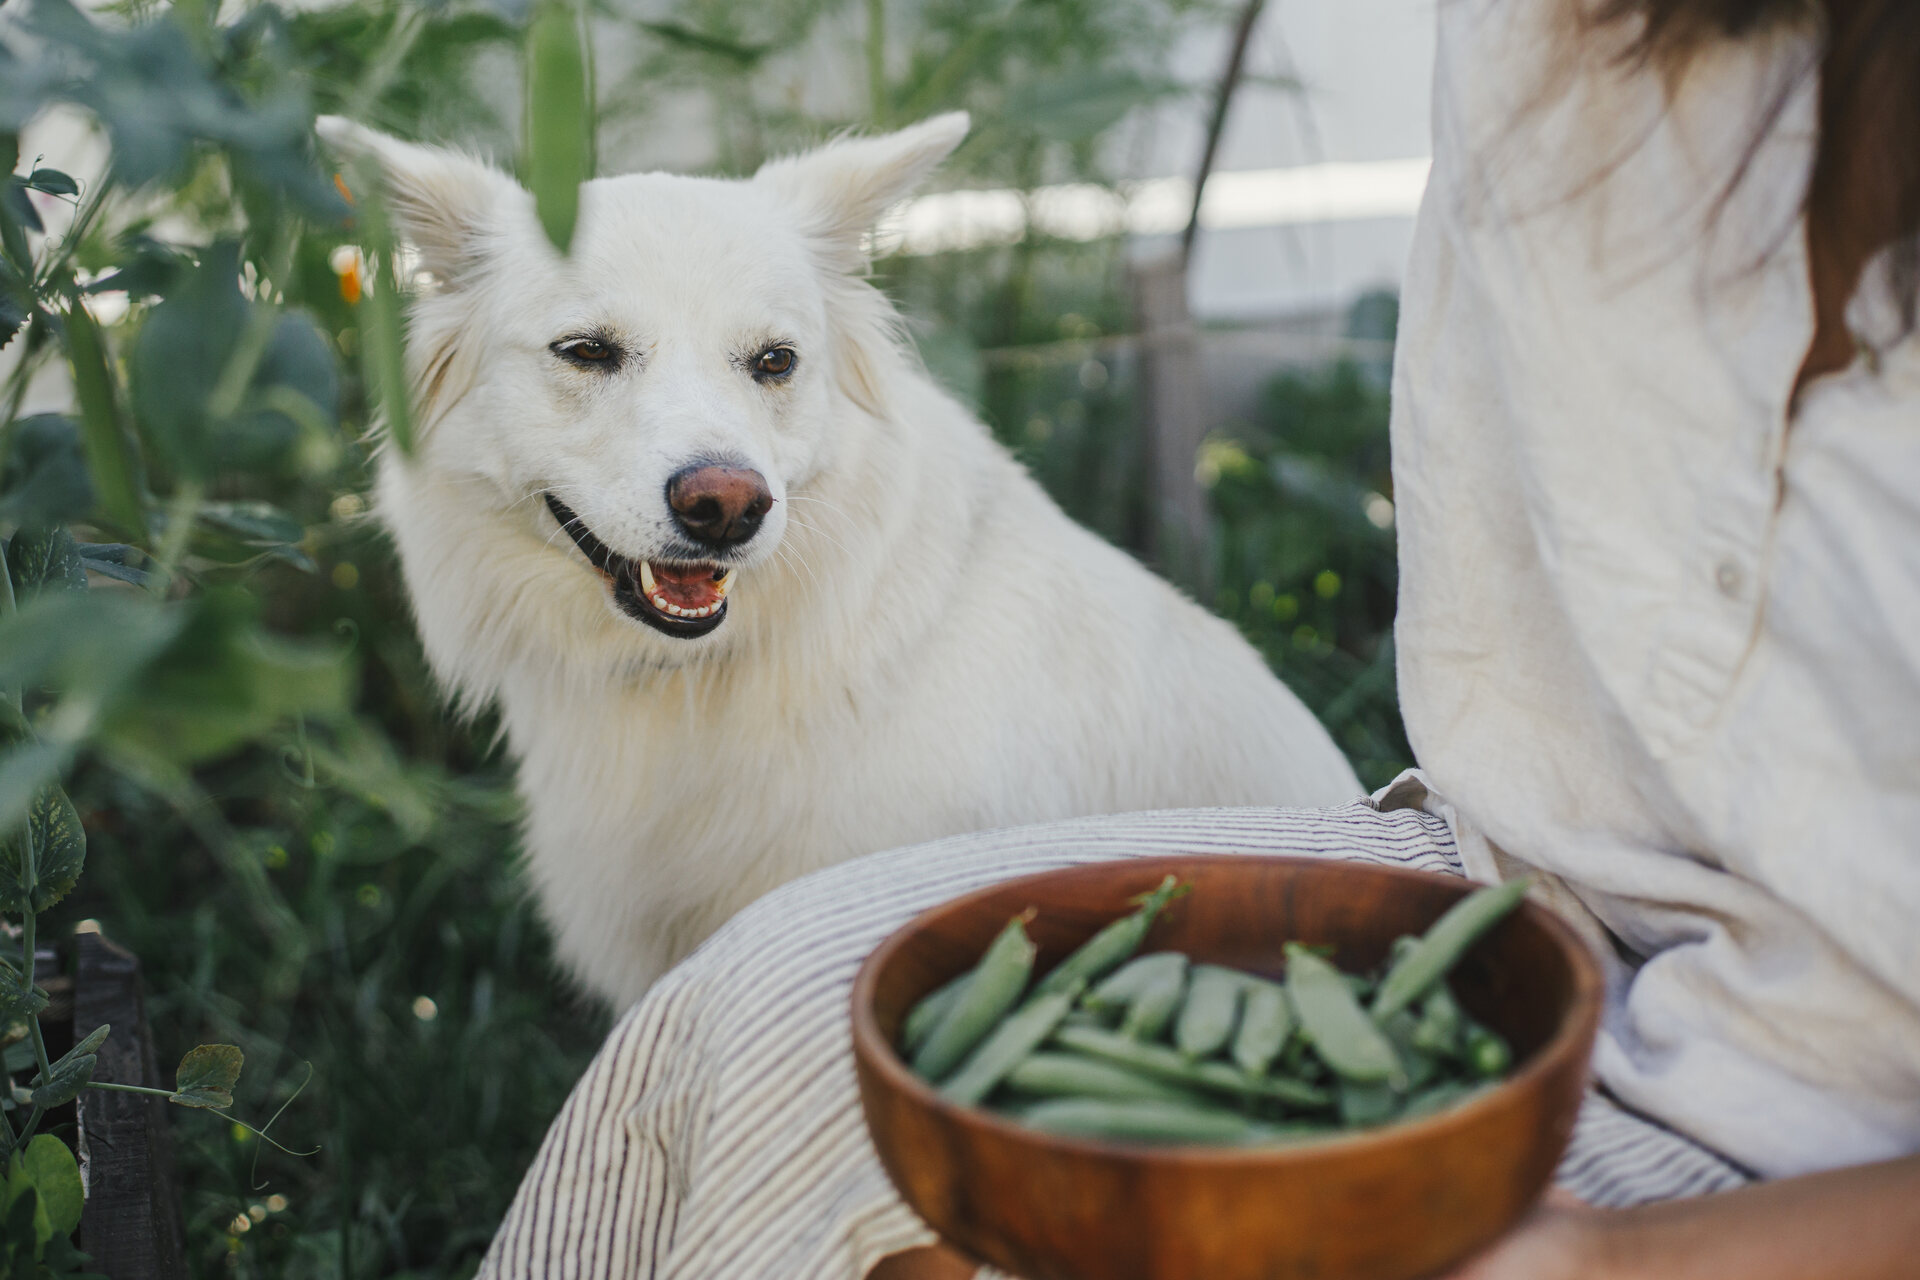 A dog sitting by a woman holding a bowl of green peas